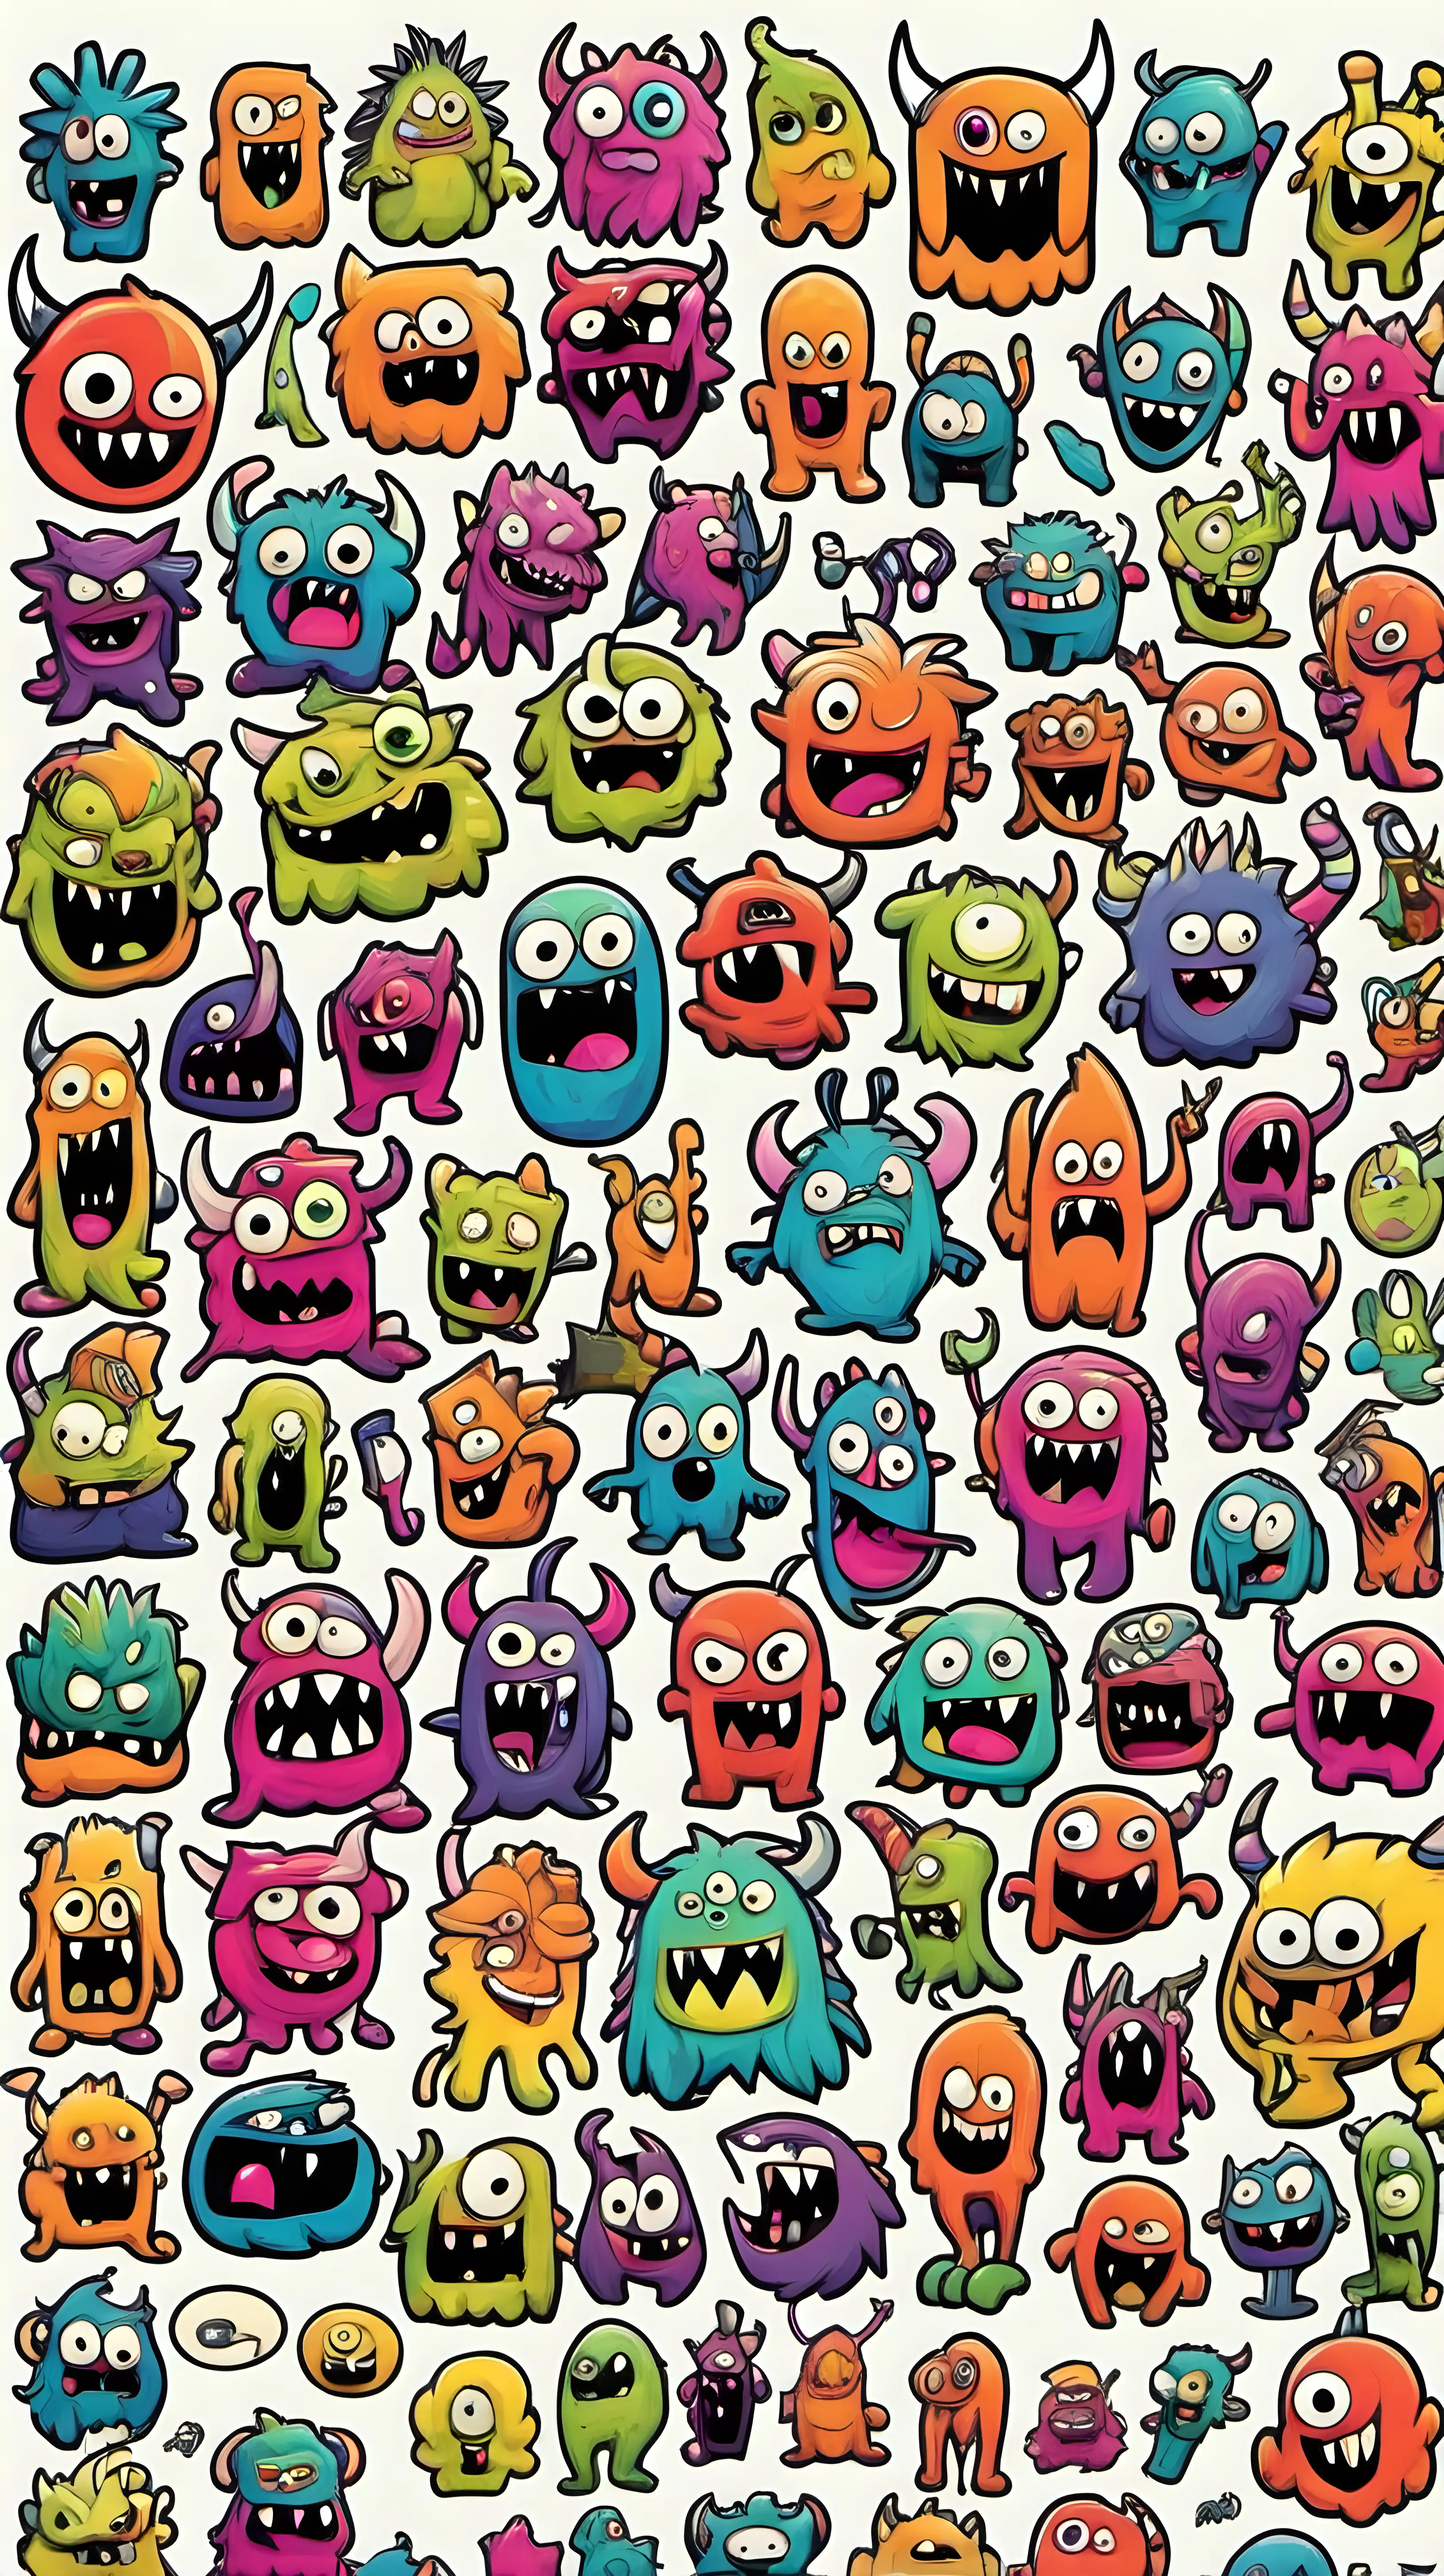 Colorful Monster Sticker Collage